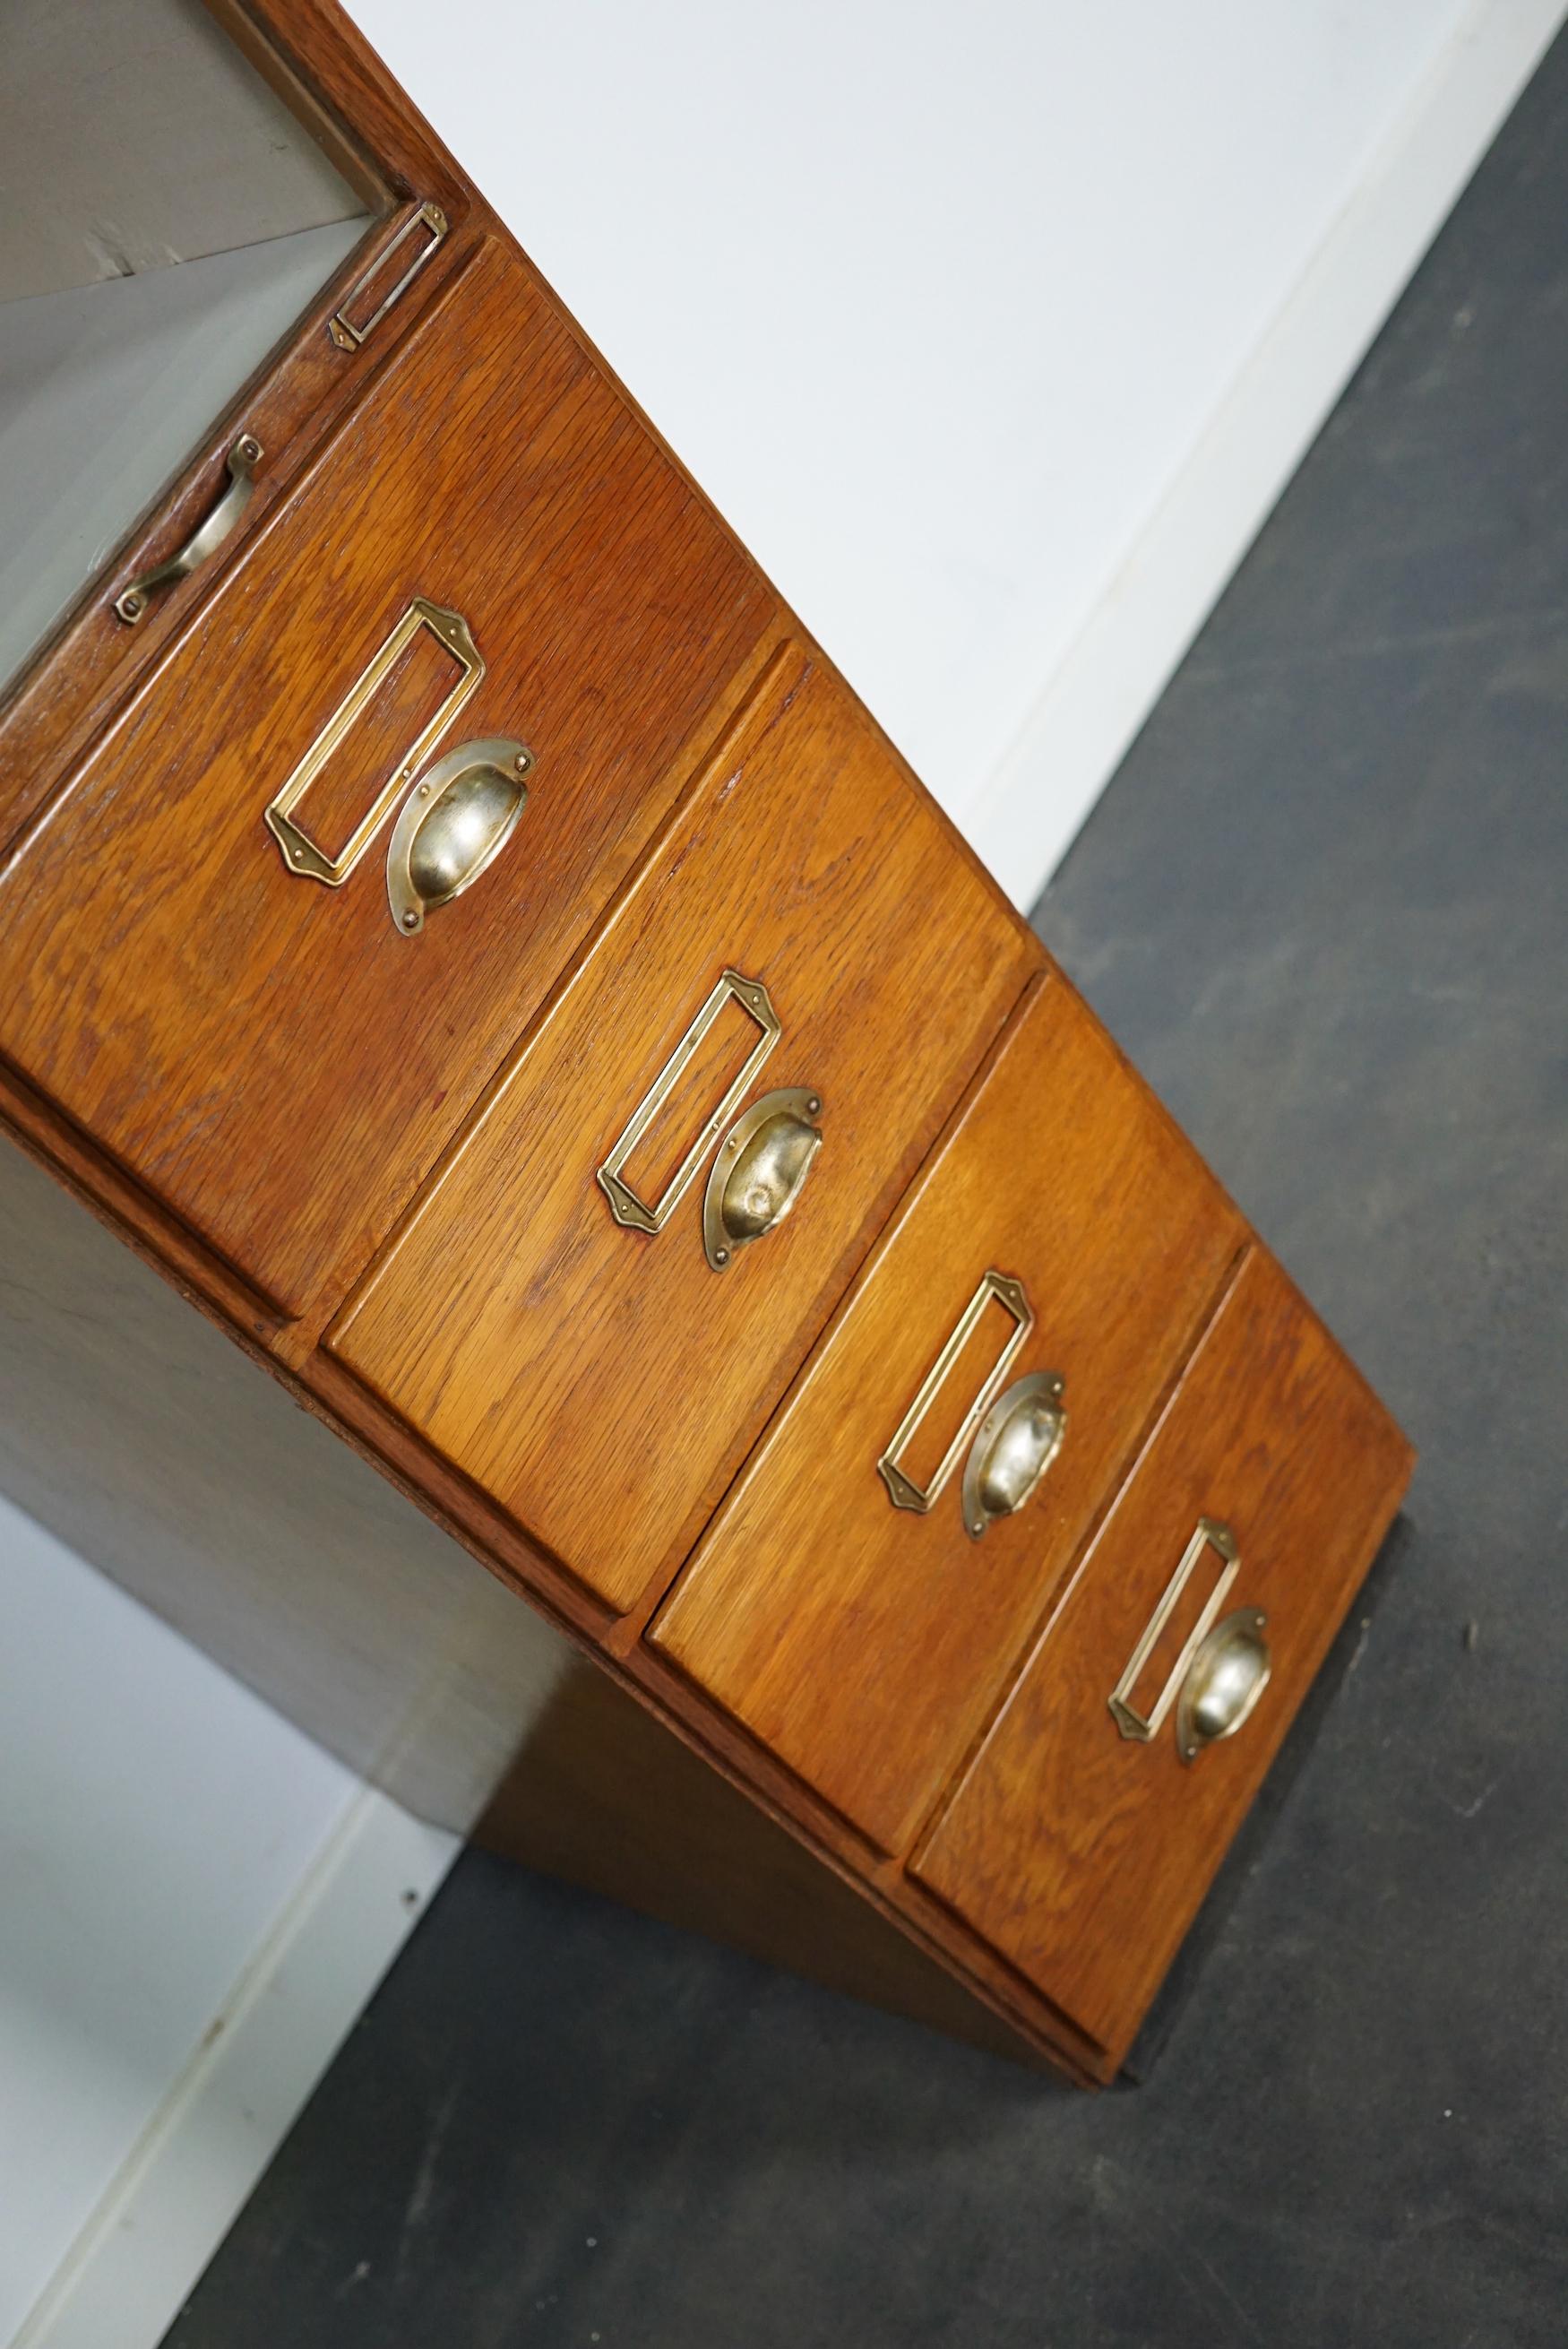 This haberdashery cabinet was produced during the 1930s in the Netherlands. This piece features 11 drawers in oak with or w/o glass fronts and metal handles. It was originally used in a shop for sewing supplies and fabrics in Amsterdam. The interior